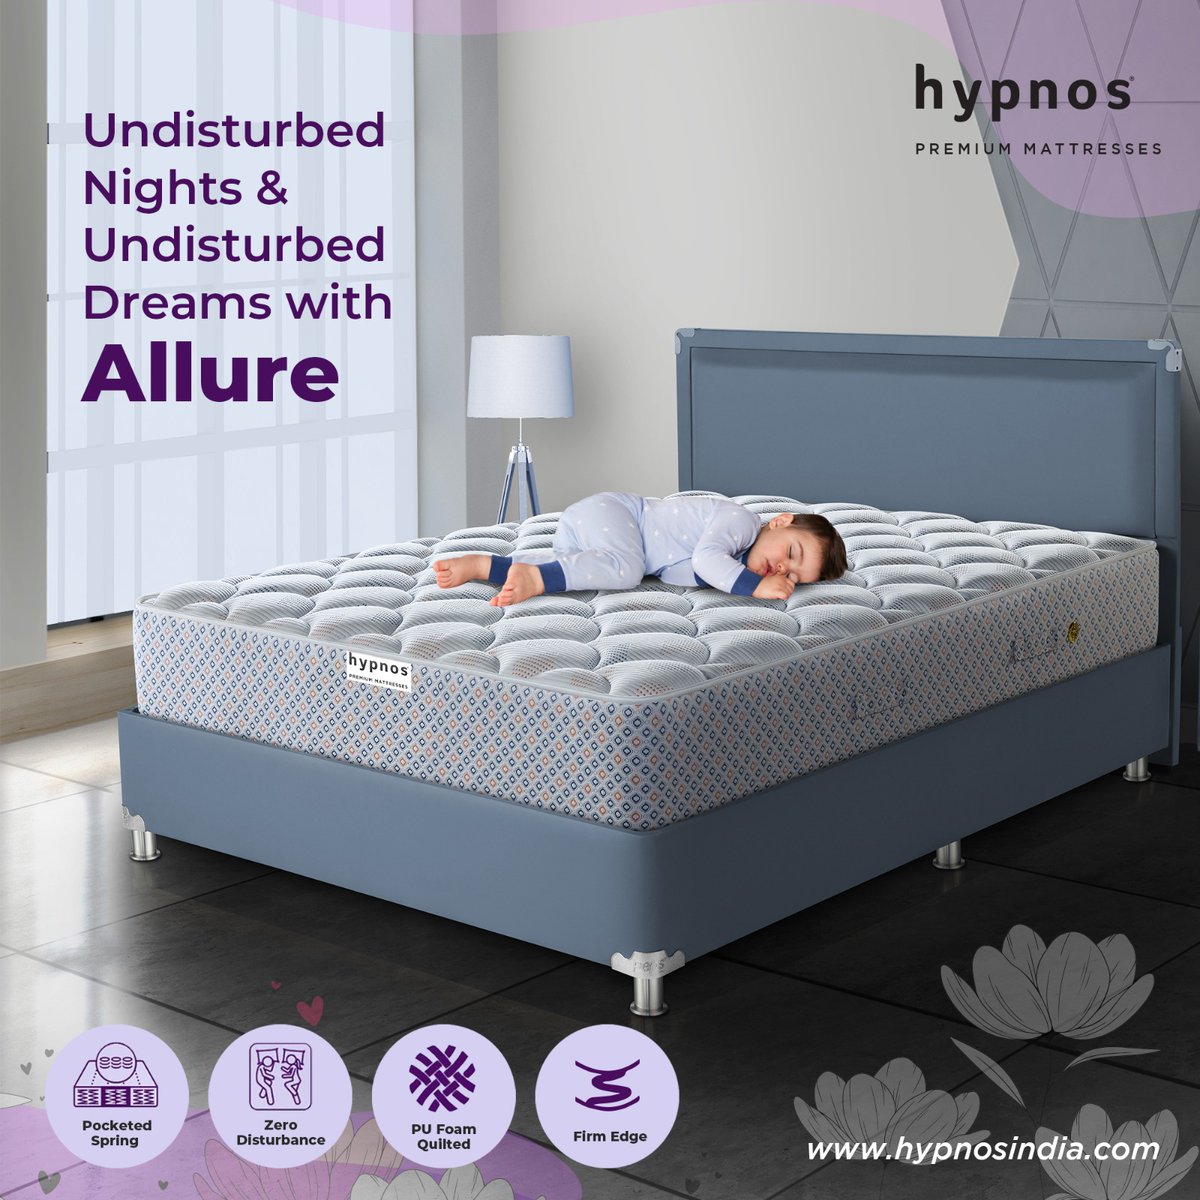 Do the nightly wakeups disturb your peaceful sleep? 
Then Hypnos Allure is here for your rescue!

Grab now: bit.ly/3Rwgq4B 

#hypnos #hypnosindia #hypnosmattress #sleepmattress #foammattress #springmattress #pocketedspring #comfort #pufoam #softmattress